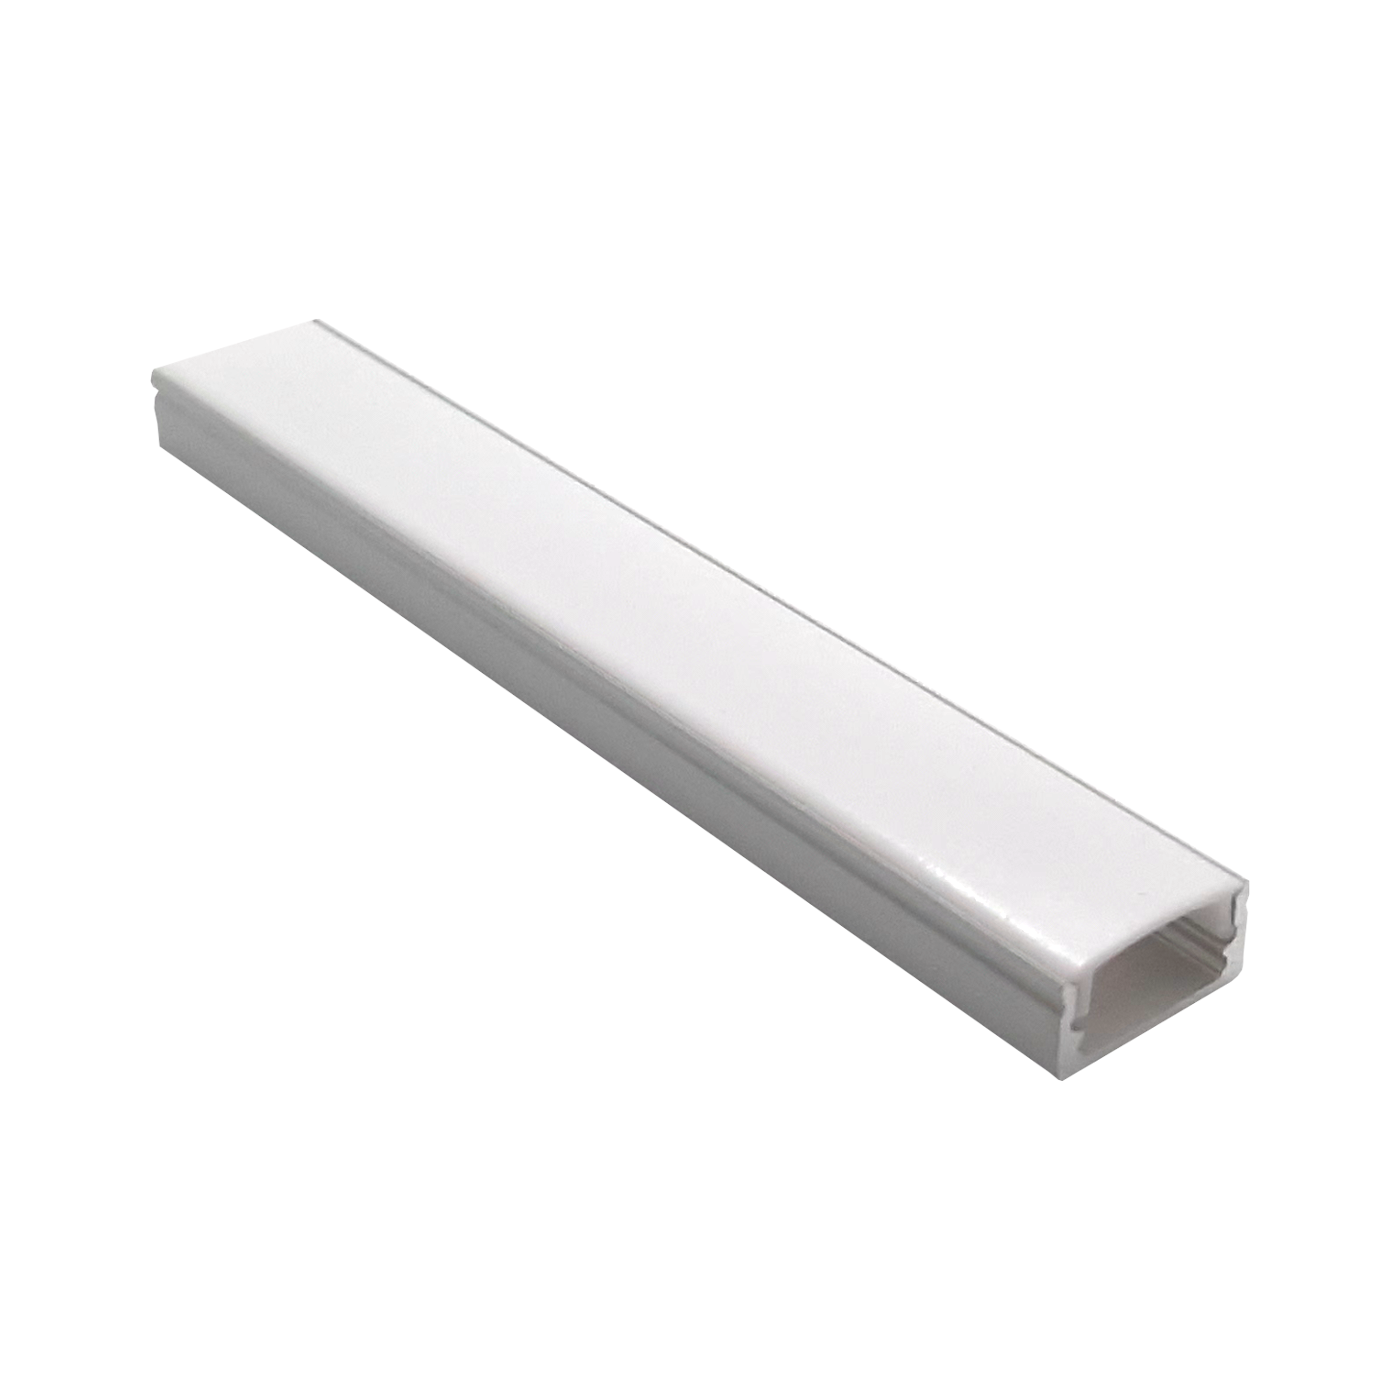 Product image of LXT11 Silver Shallow Extrusion for LED strip